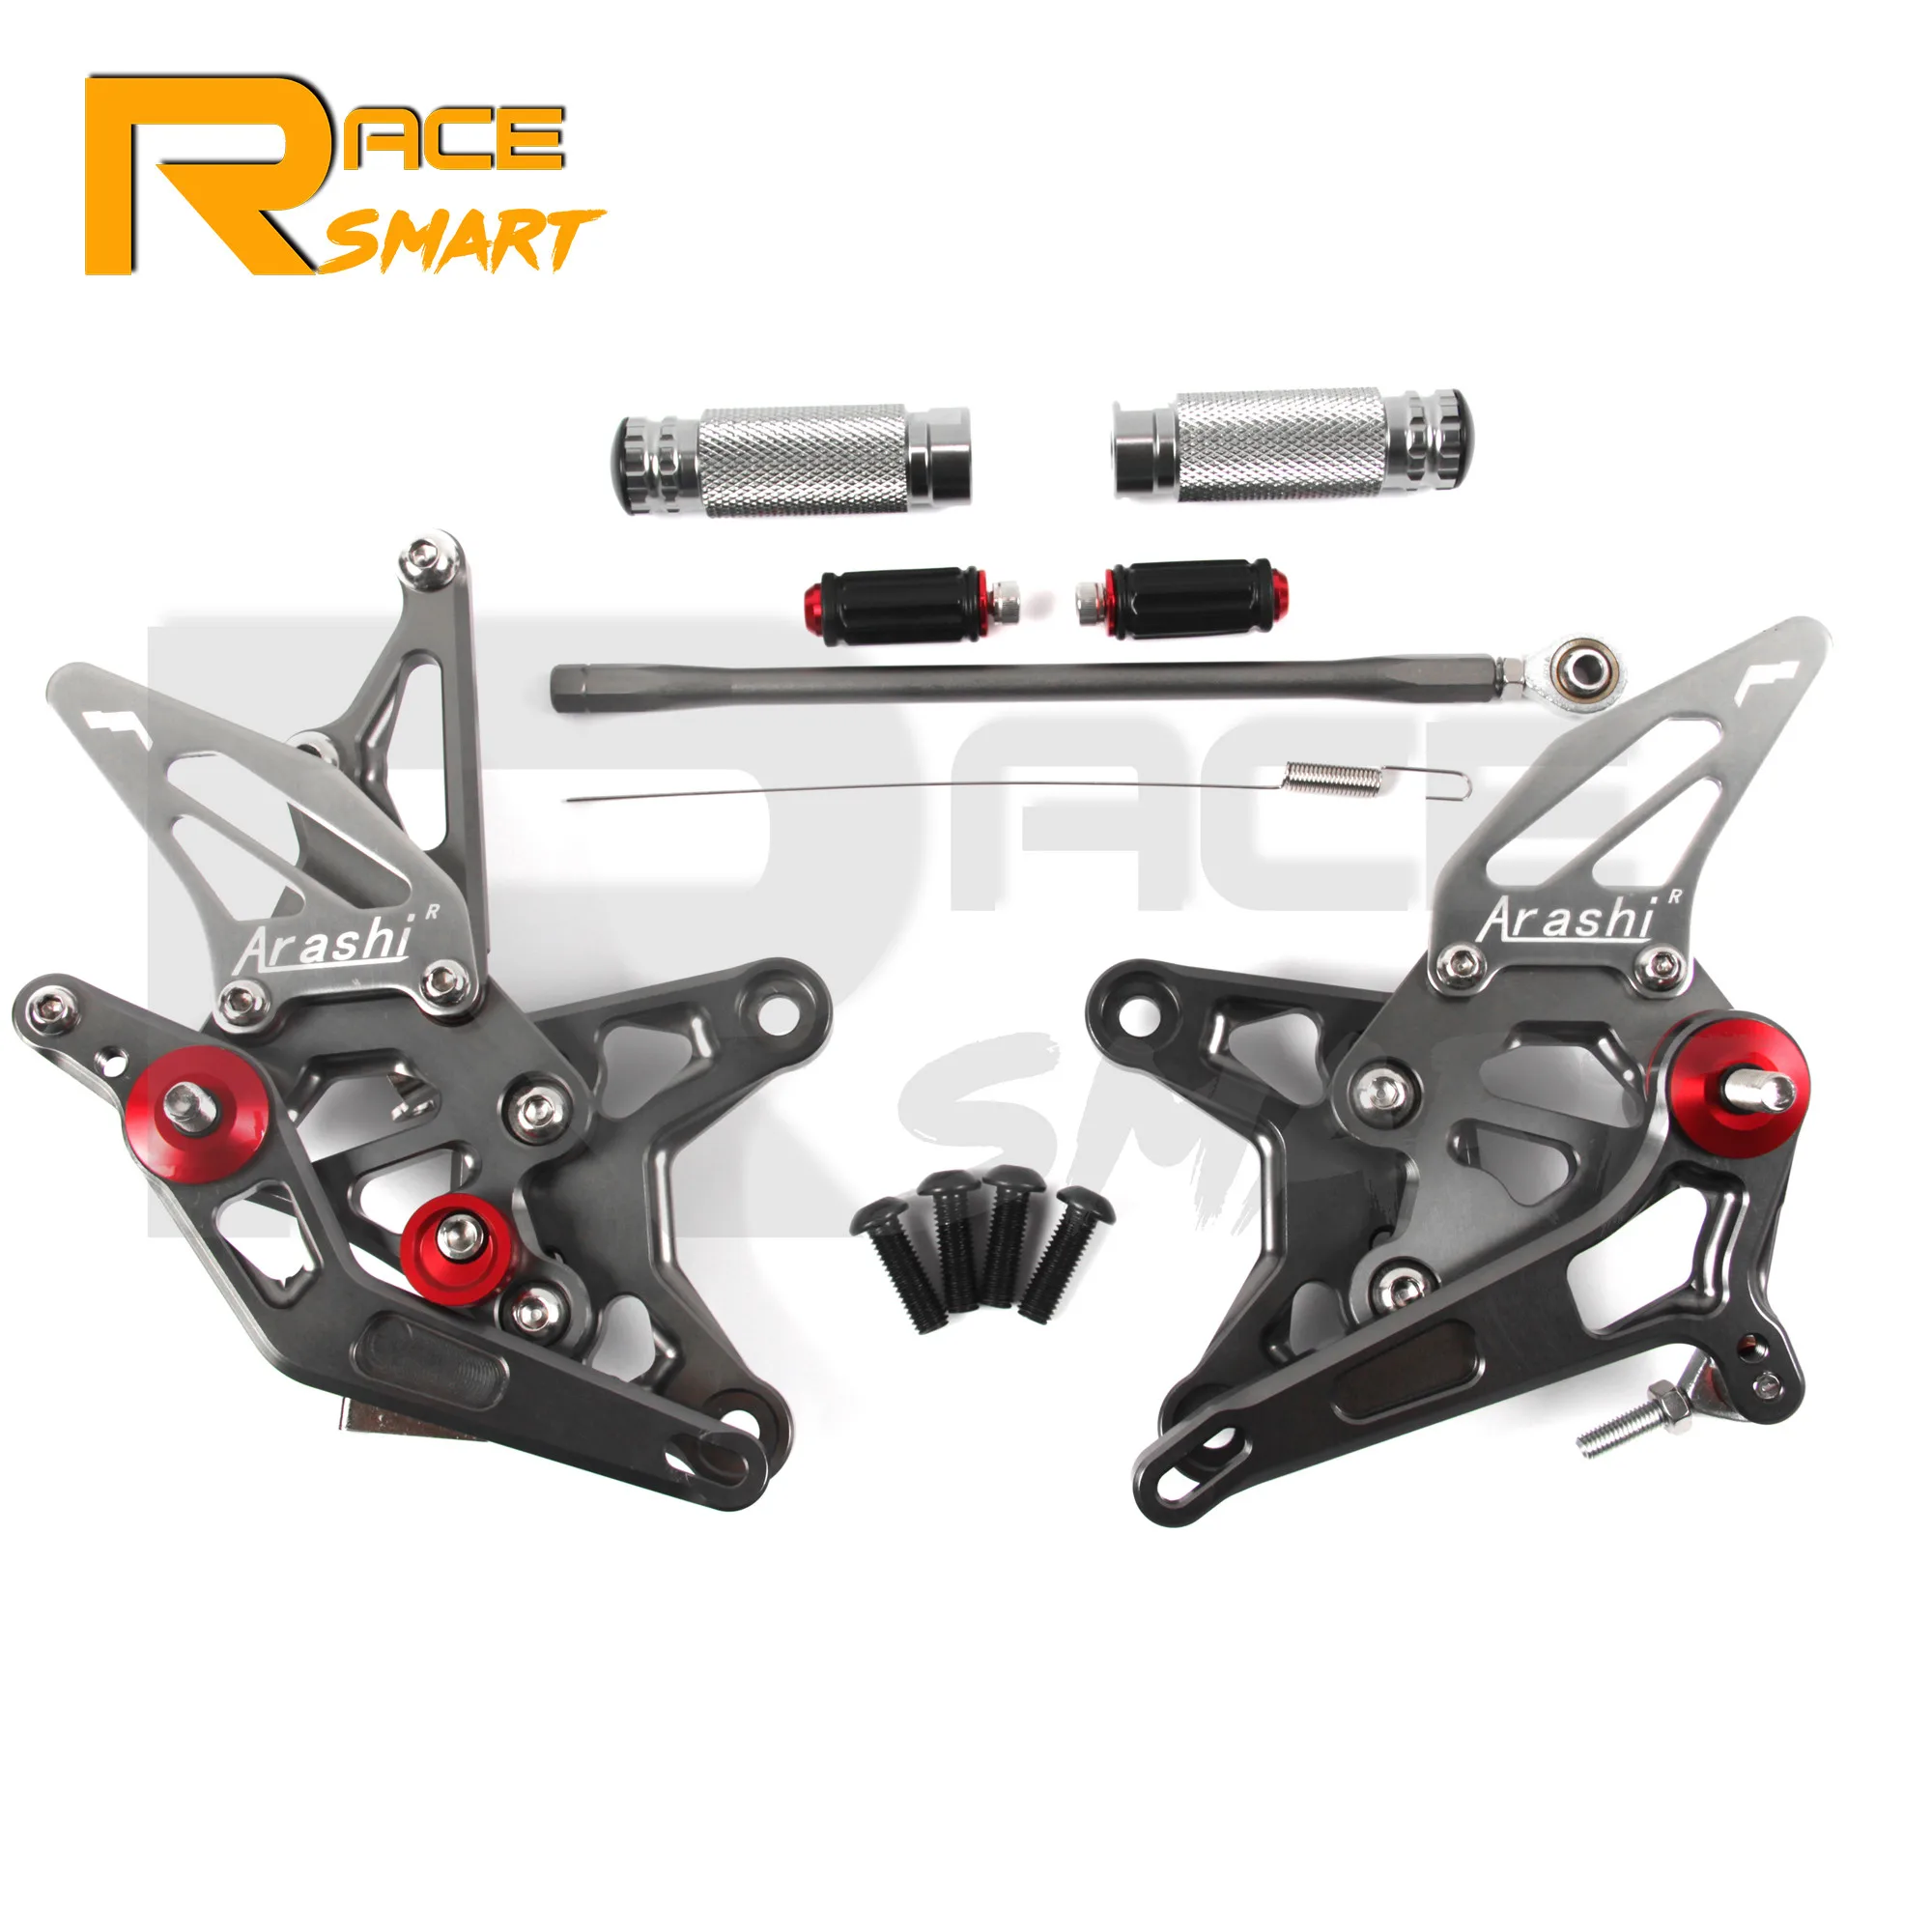 

For KAWASAKI ZX-6R ZX6R ZX636 2015-2017 Motorcycle CNC Adjustable Rear Footrests Foot Rest Pegs Pedal ZX 6R 636 2016 15 16 17